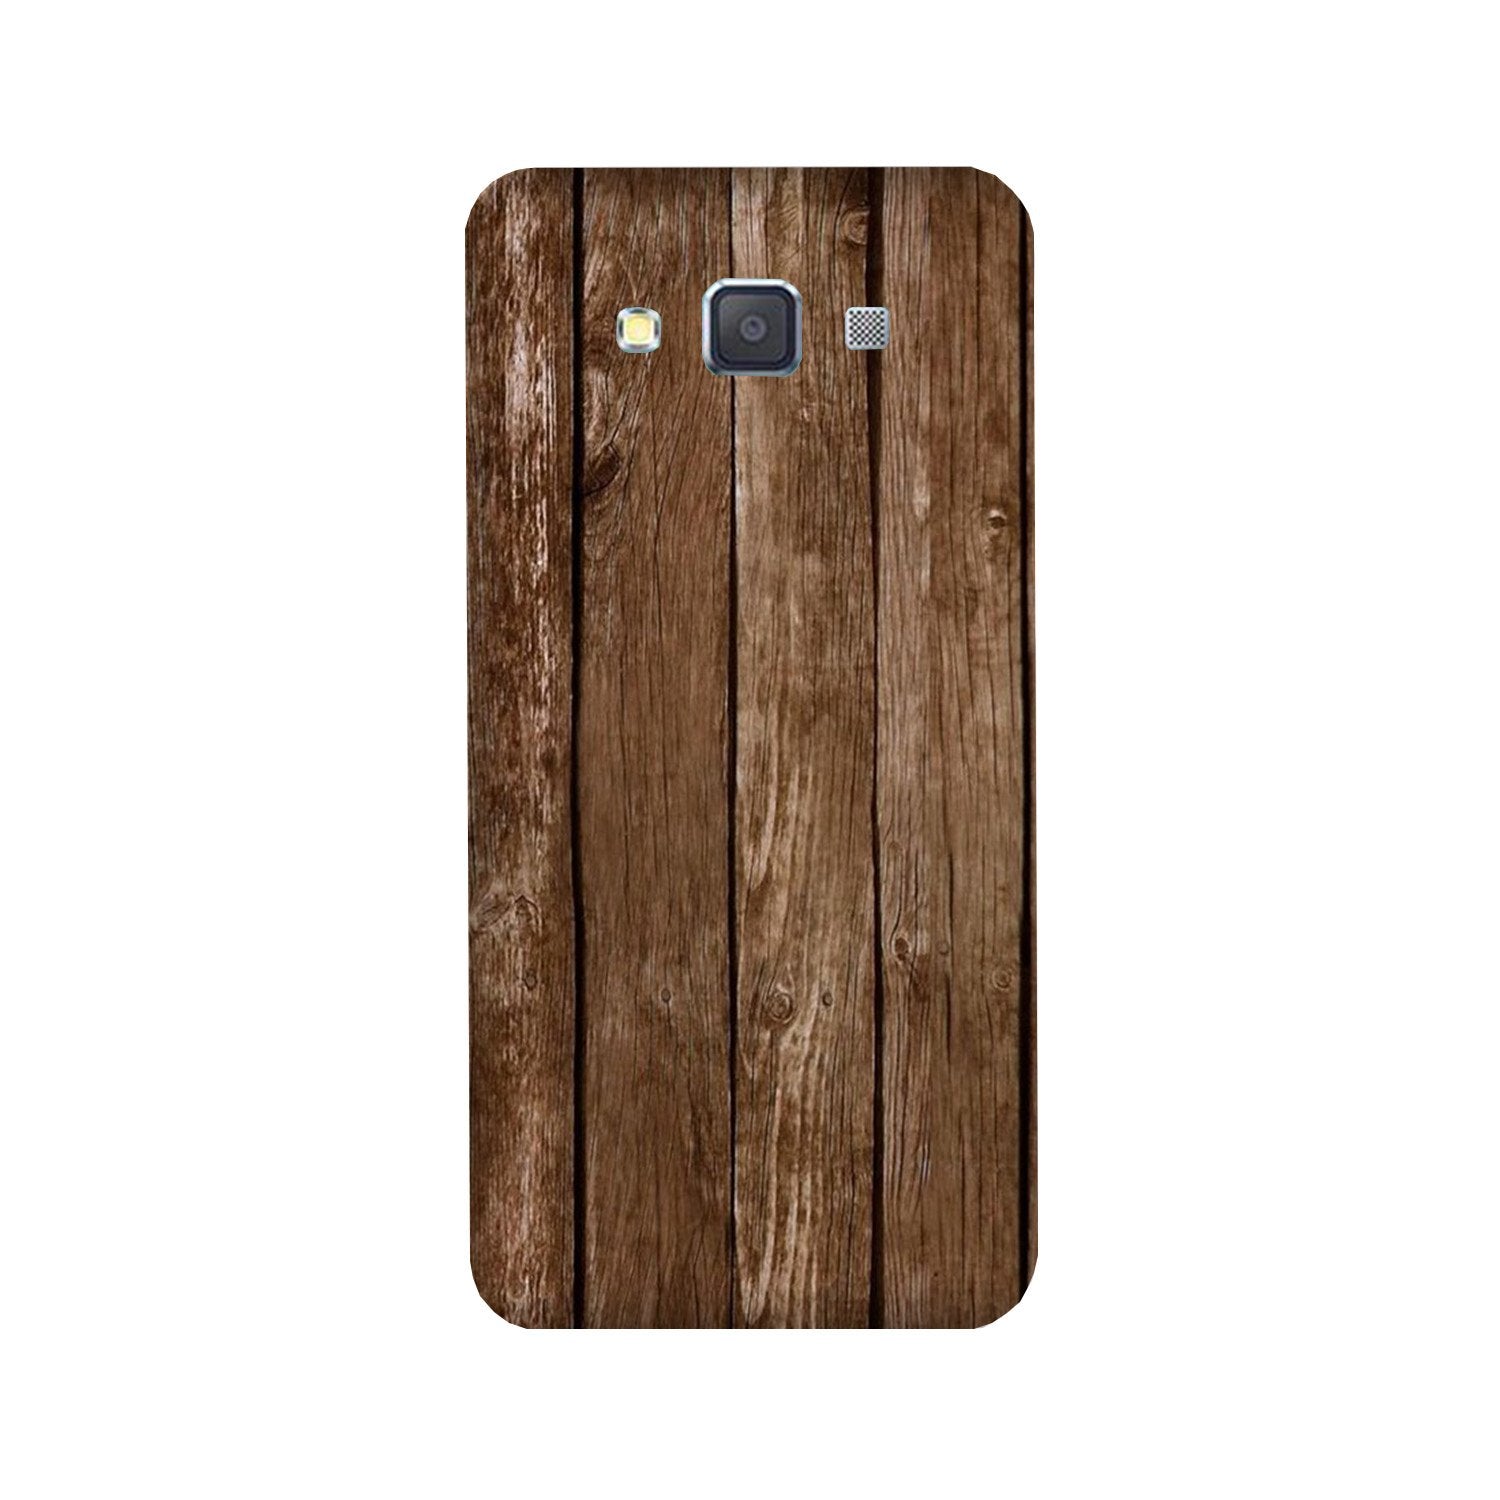 Wooden Look Case for Galaxy Grand Max  (Design - 112)